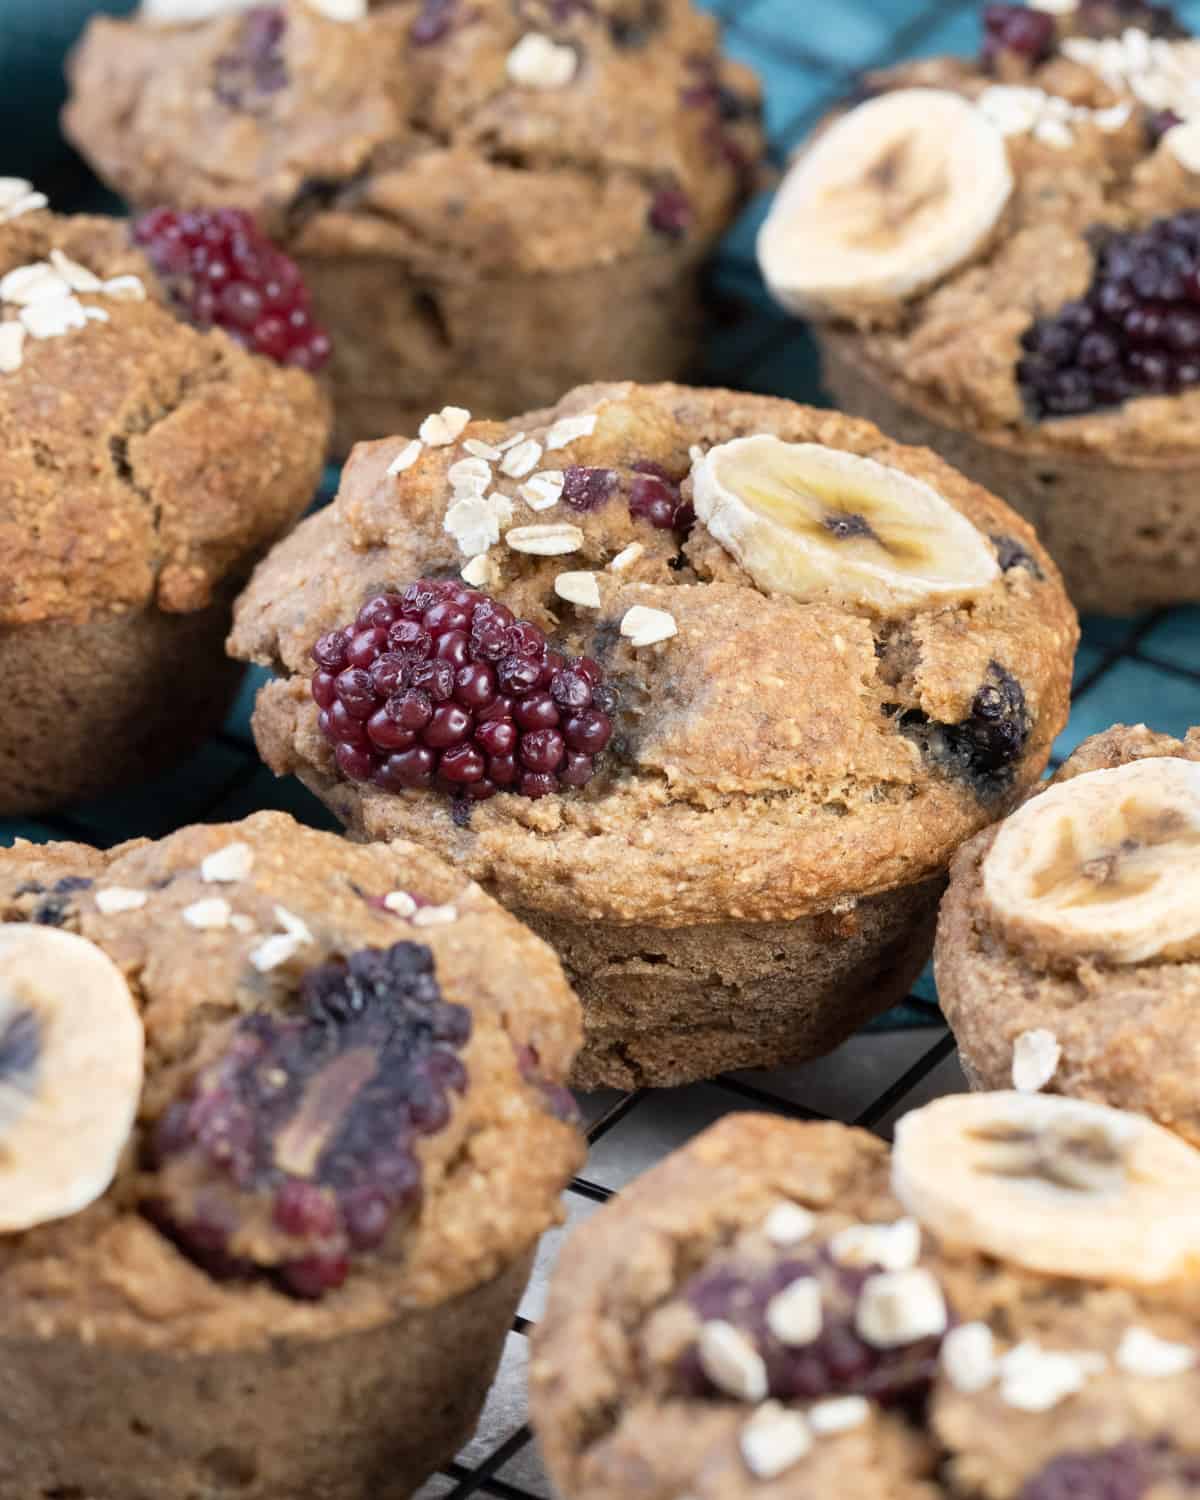 Homemade oatmeal muffins studded with blackberries and banana pieces on a cooling rack, sprinkled with oats.